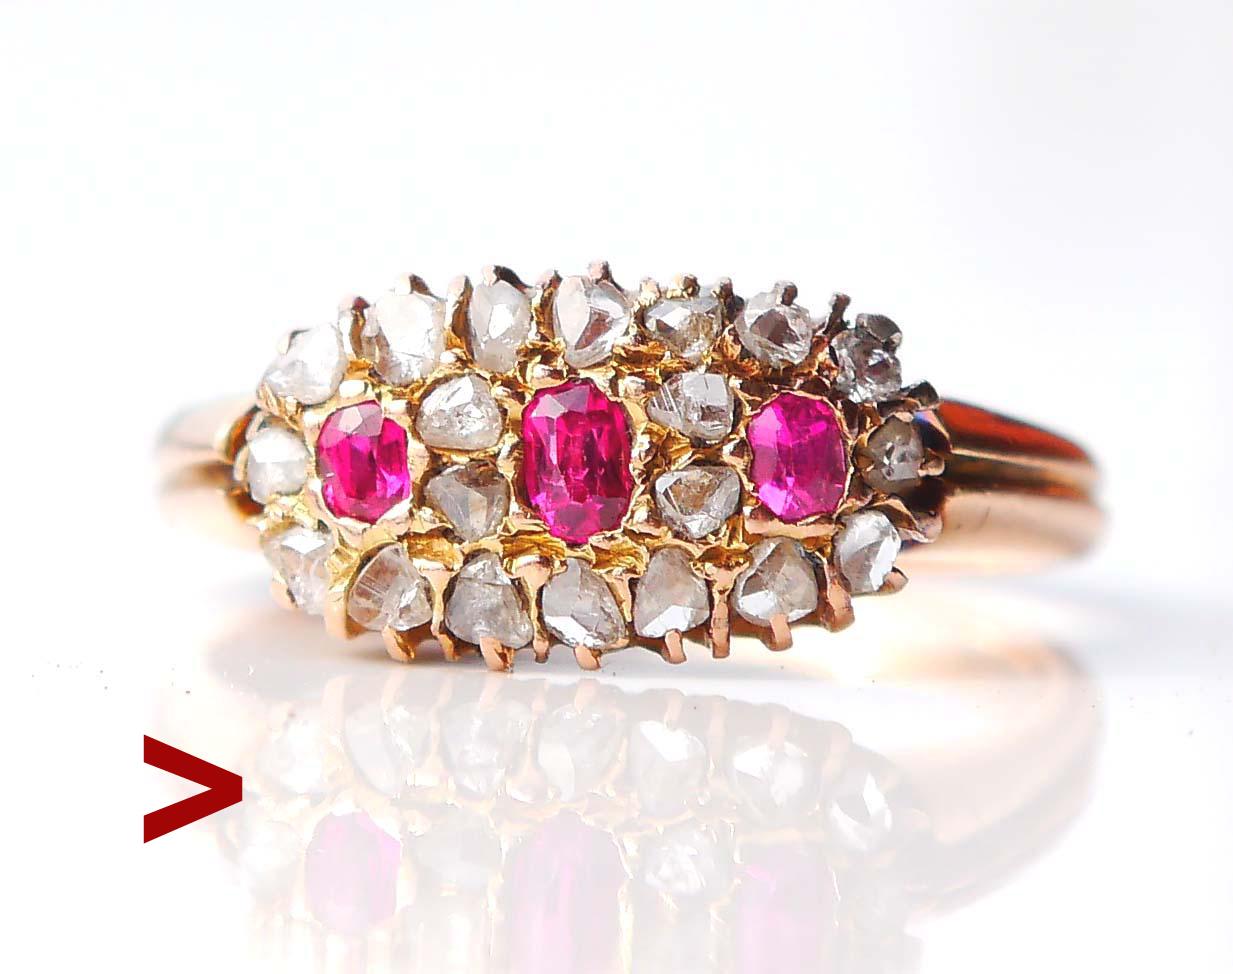 Old Estonian cluster natural Ruby and Diamonds Ring made between 1919 -1924.

This ring show well the traditions and techniques of Russian school jewelers that still remained and worked in Estonia shortly after collapse of Russian Empire when